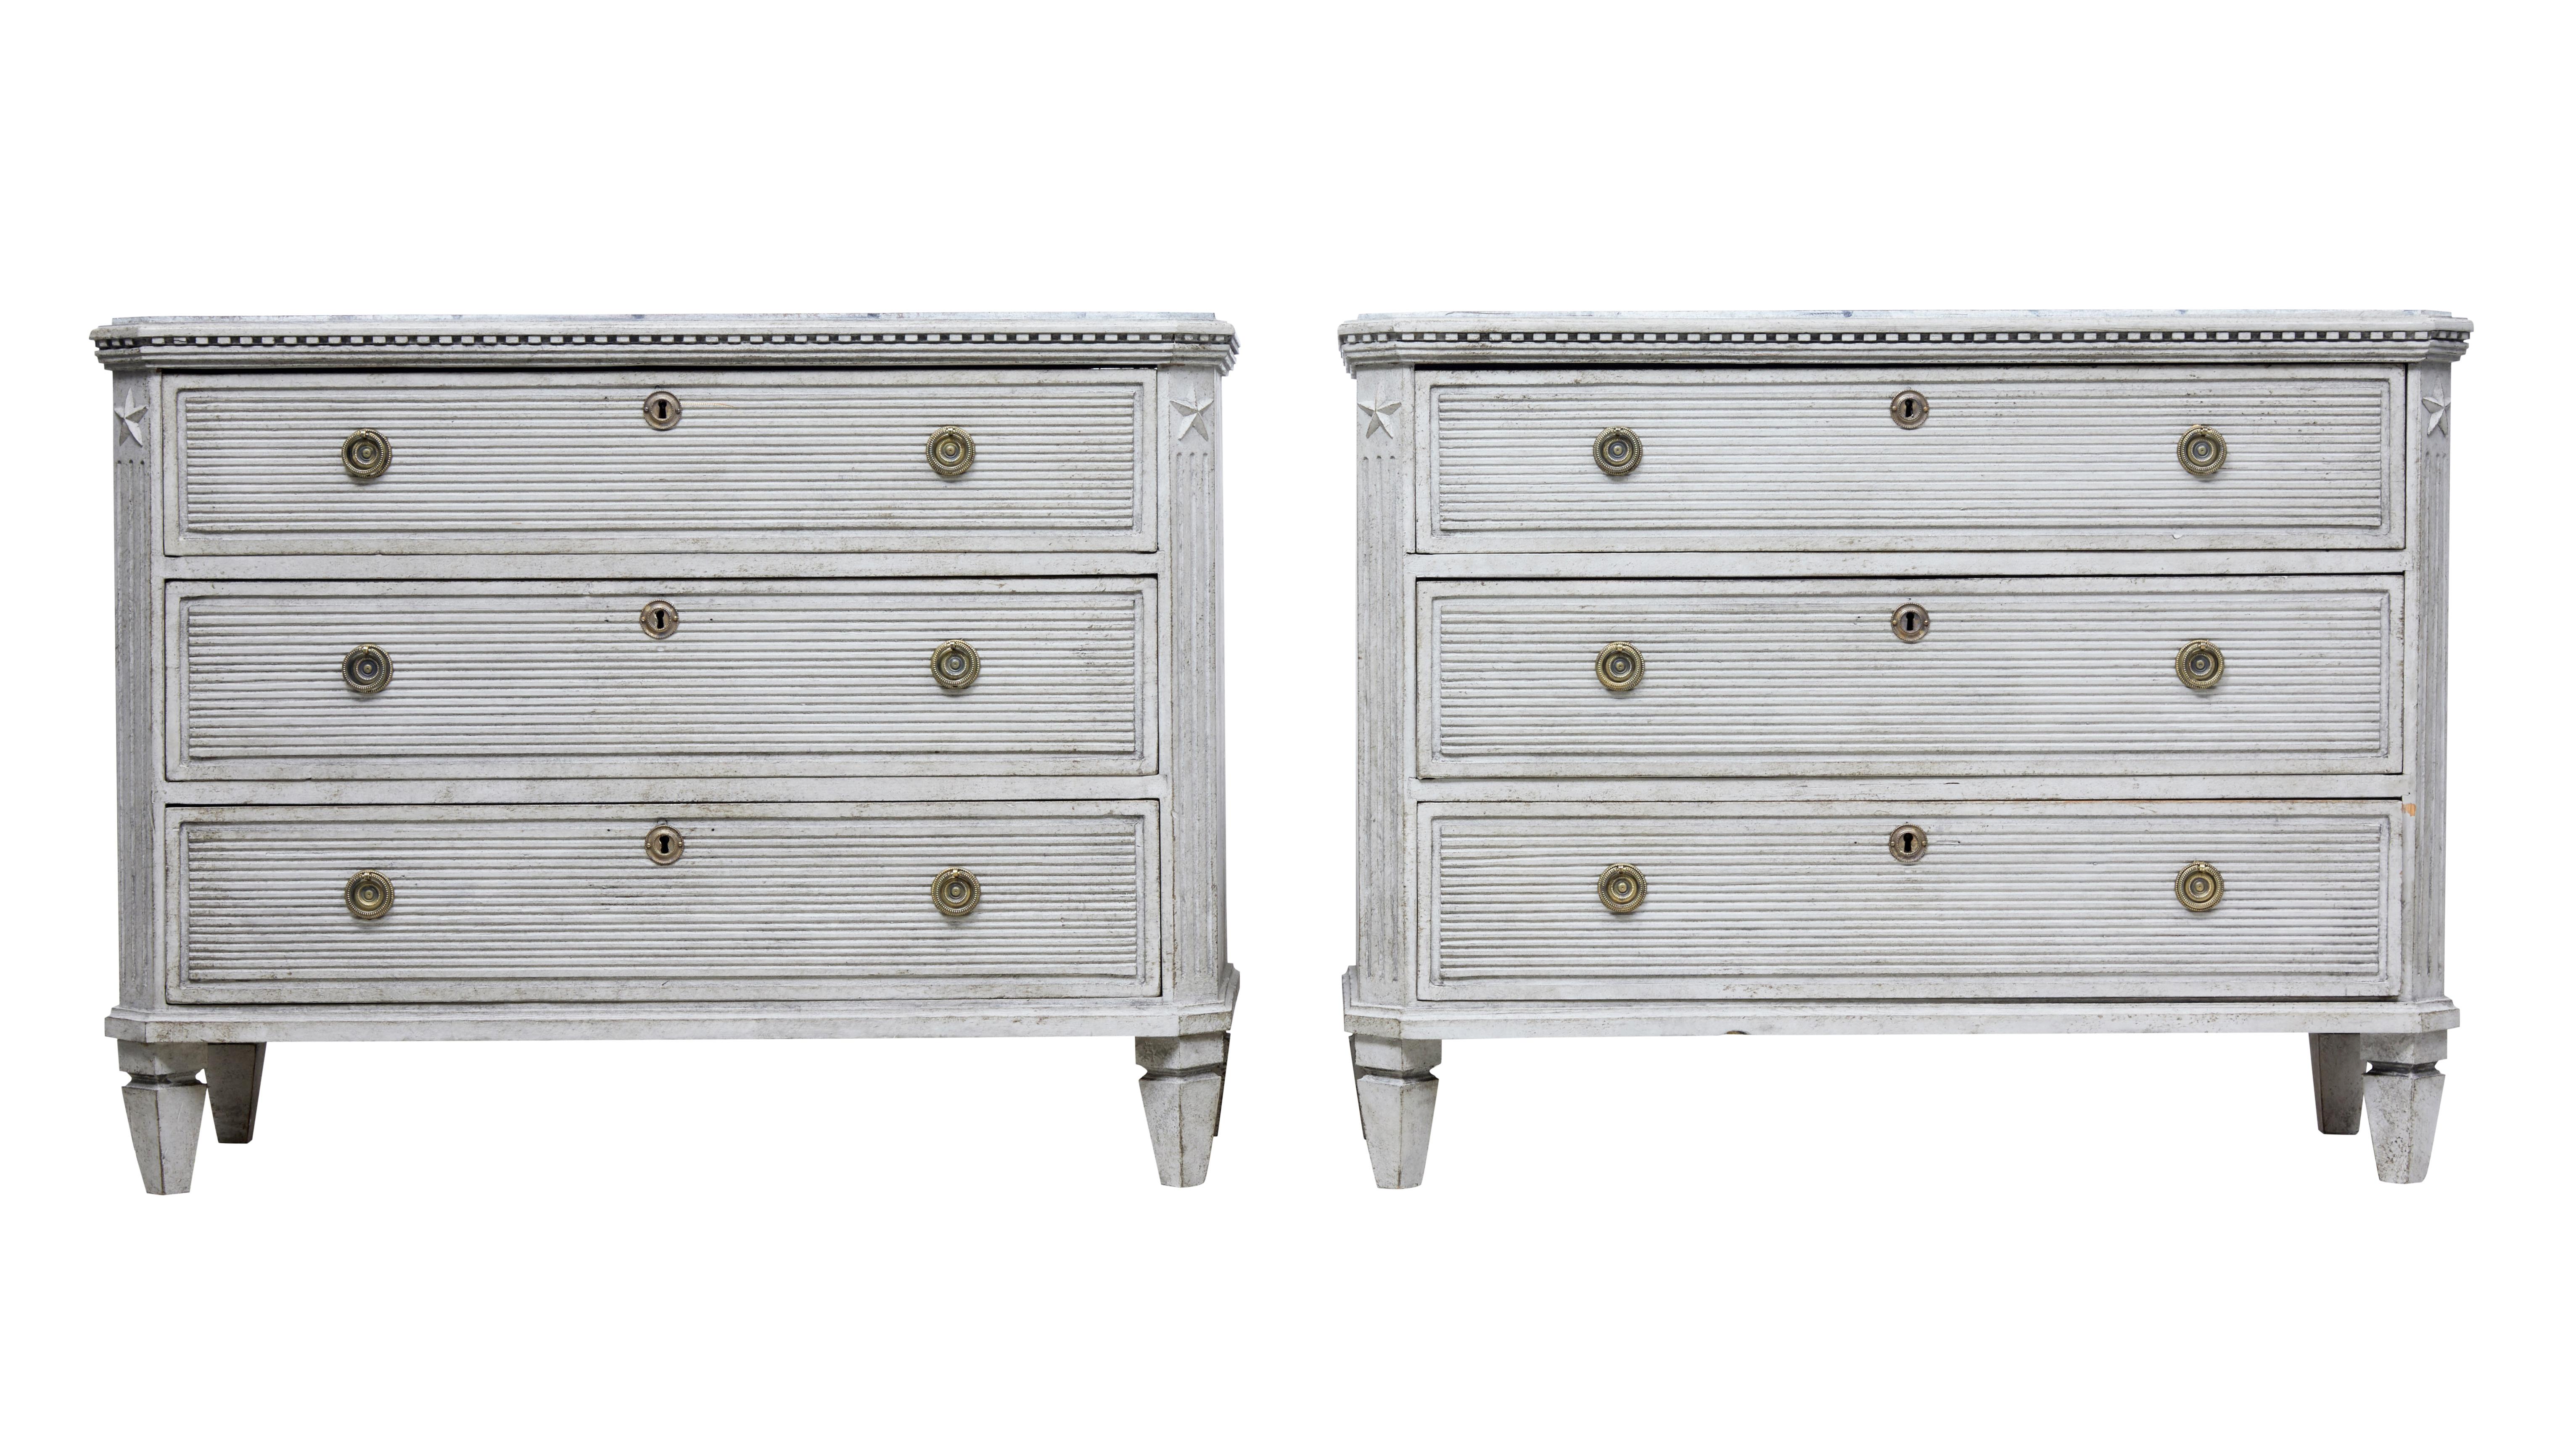 Pair of 19th century painted Scandinavian chest of drawers

Good quality pair of Swedish painted commodes, circa 1860.

Weathered grey paint with faux marble painted top surfaces. Below the top surface a dentil freize links down to the 3 drawers